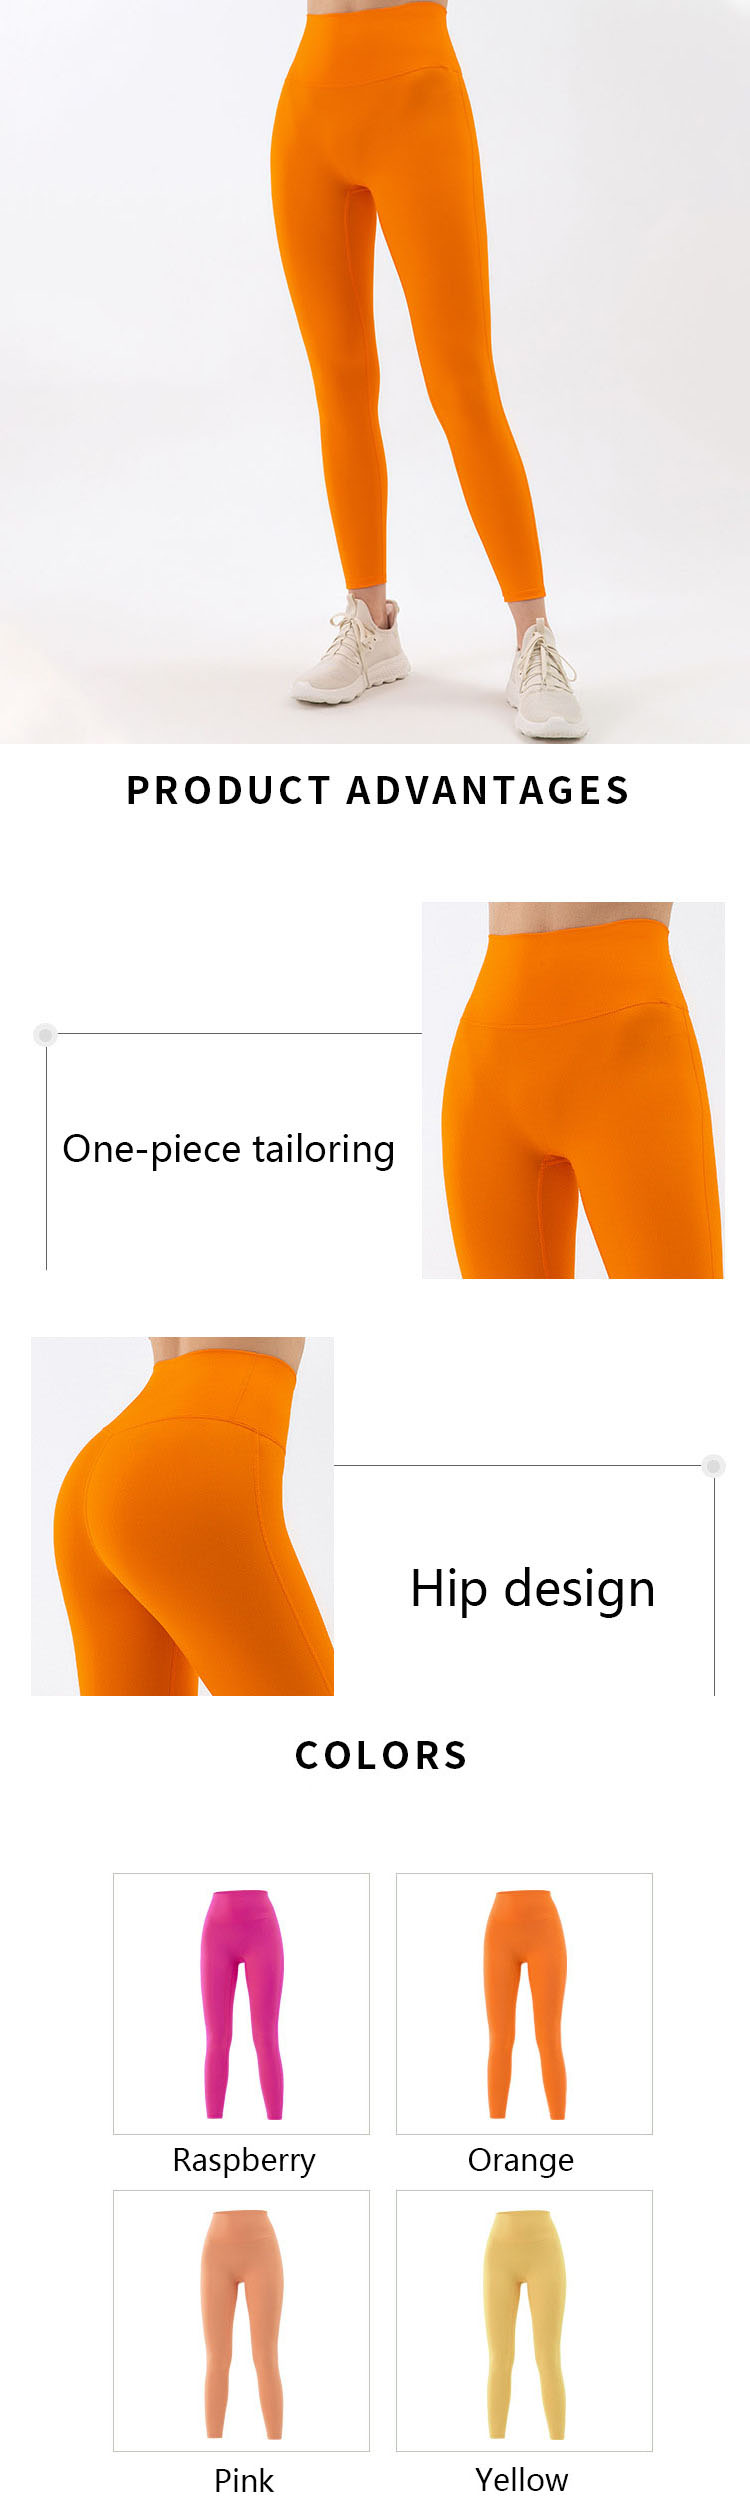 The use of structure is the top priority of orange yoga pants design